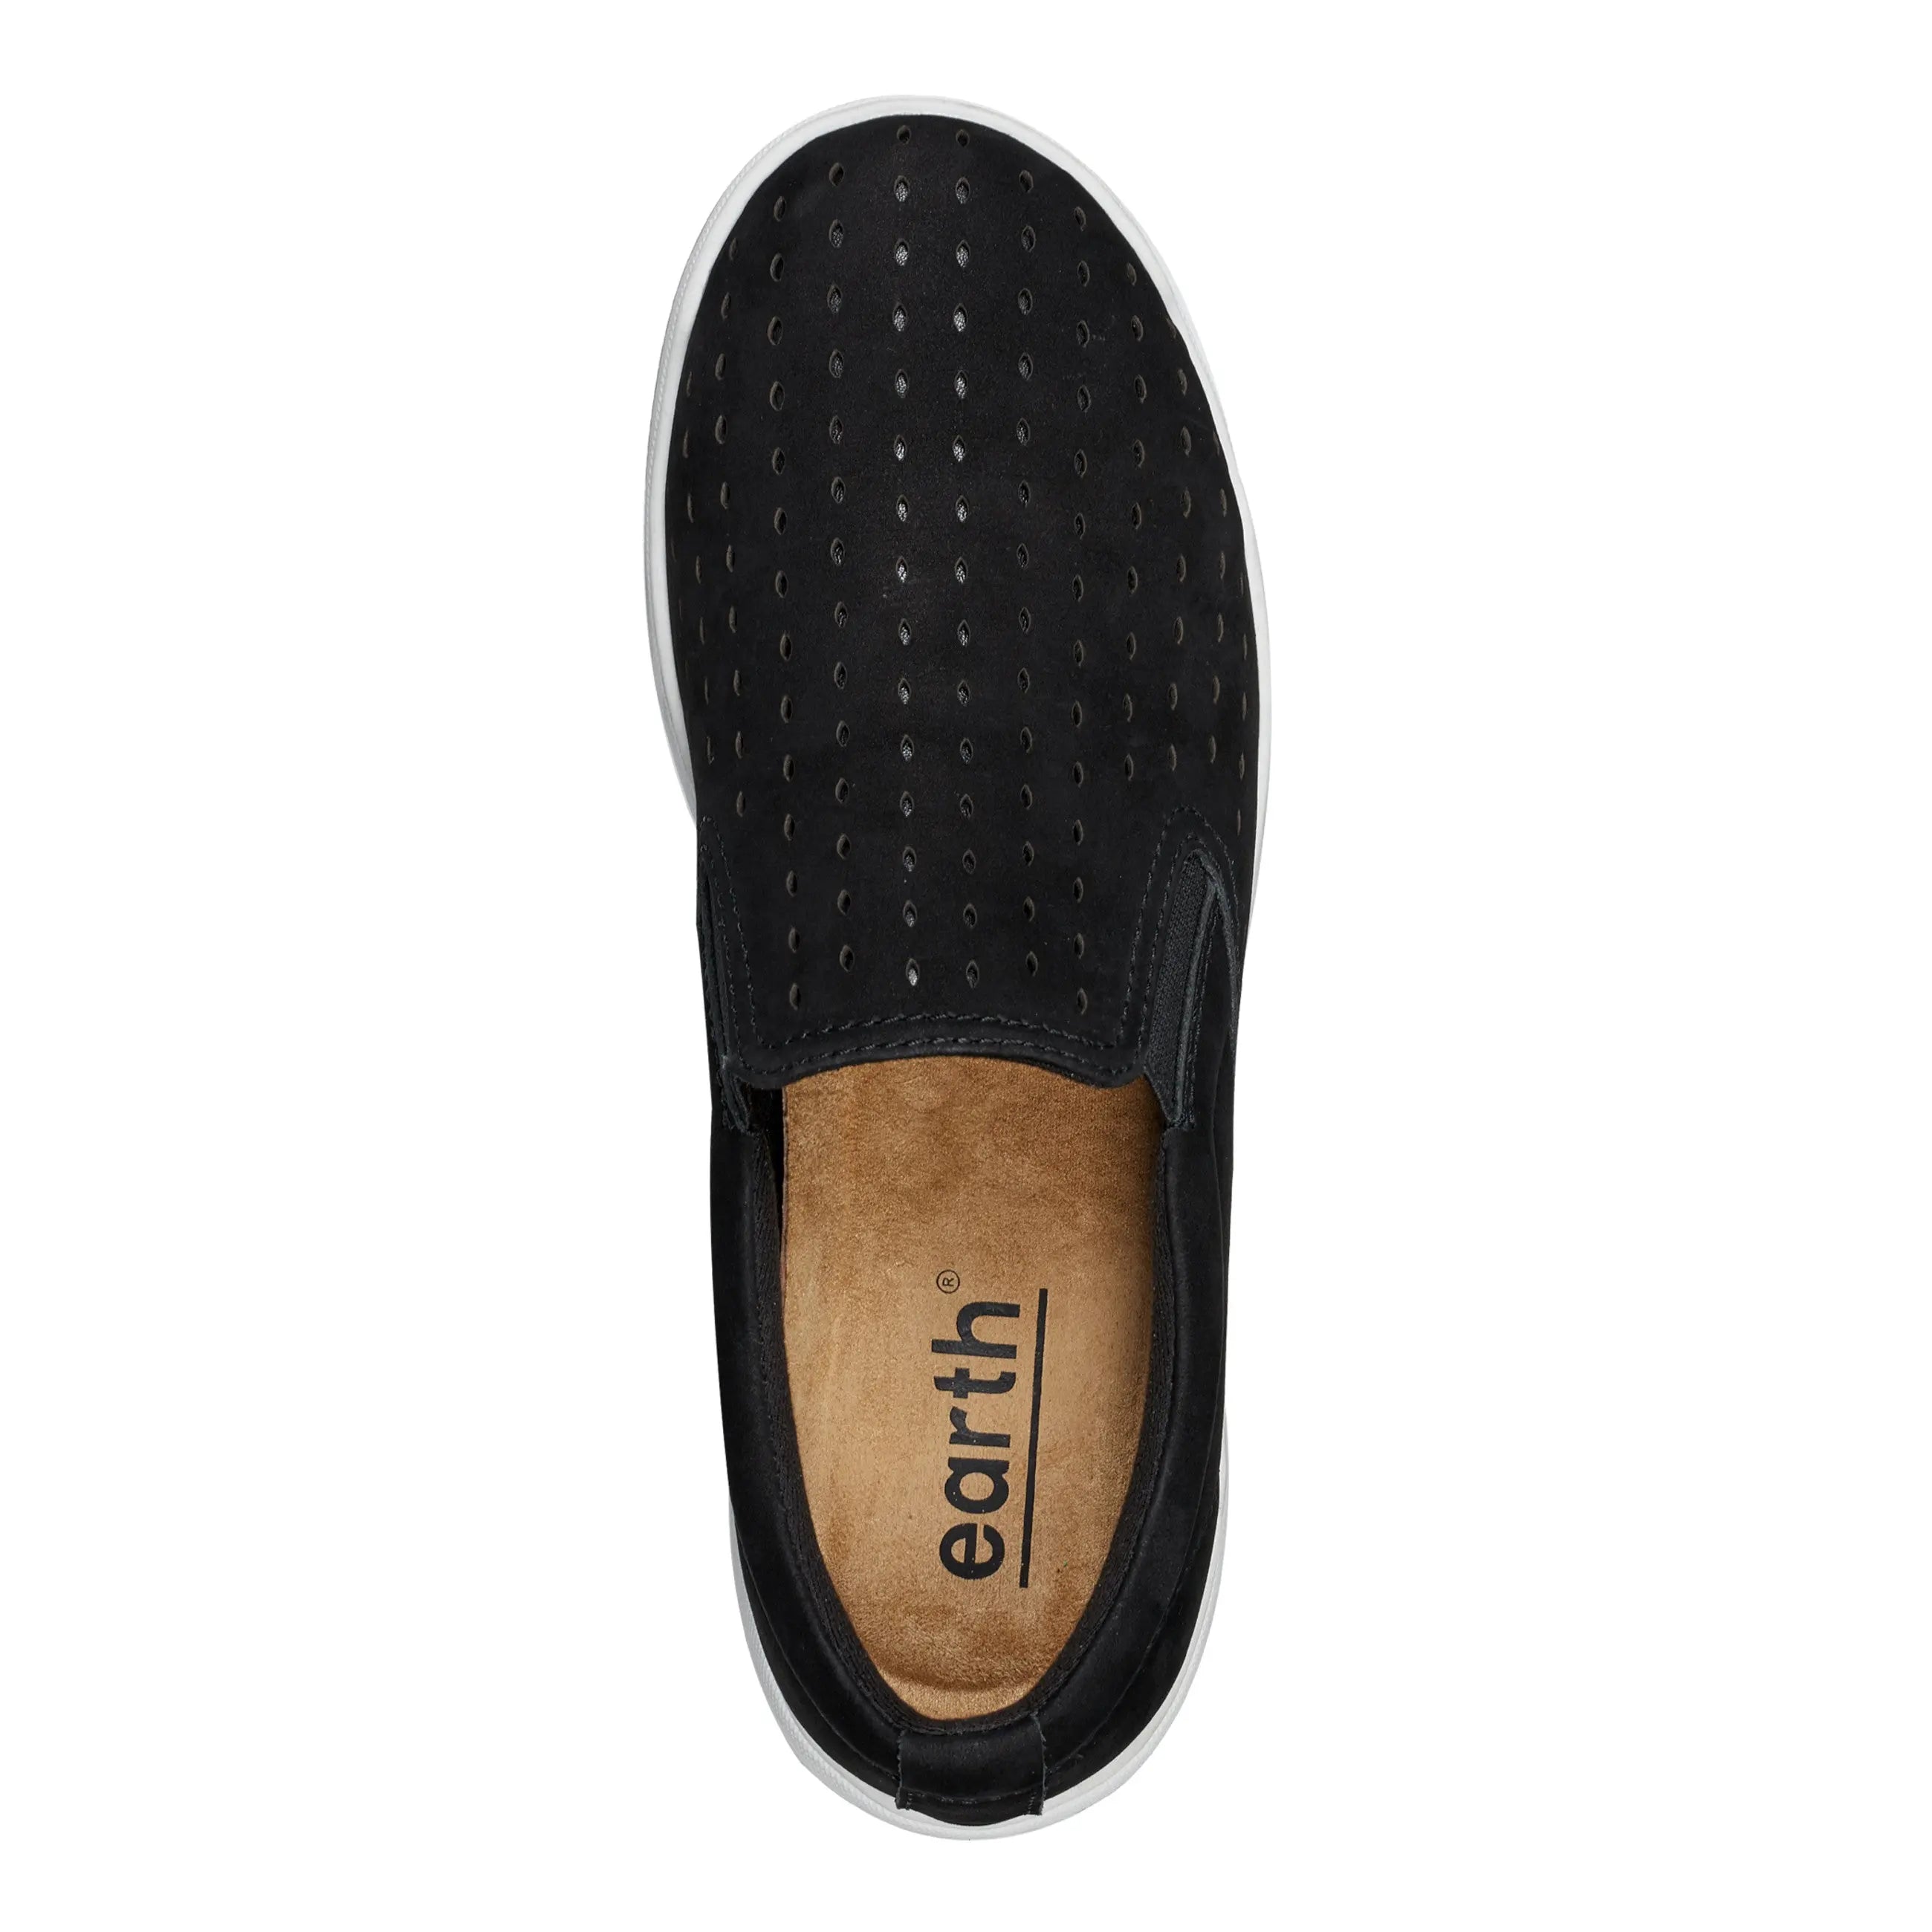 Nel Casual Slip On Sneakers